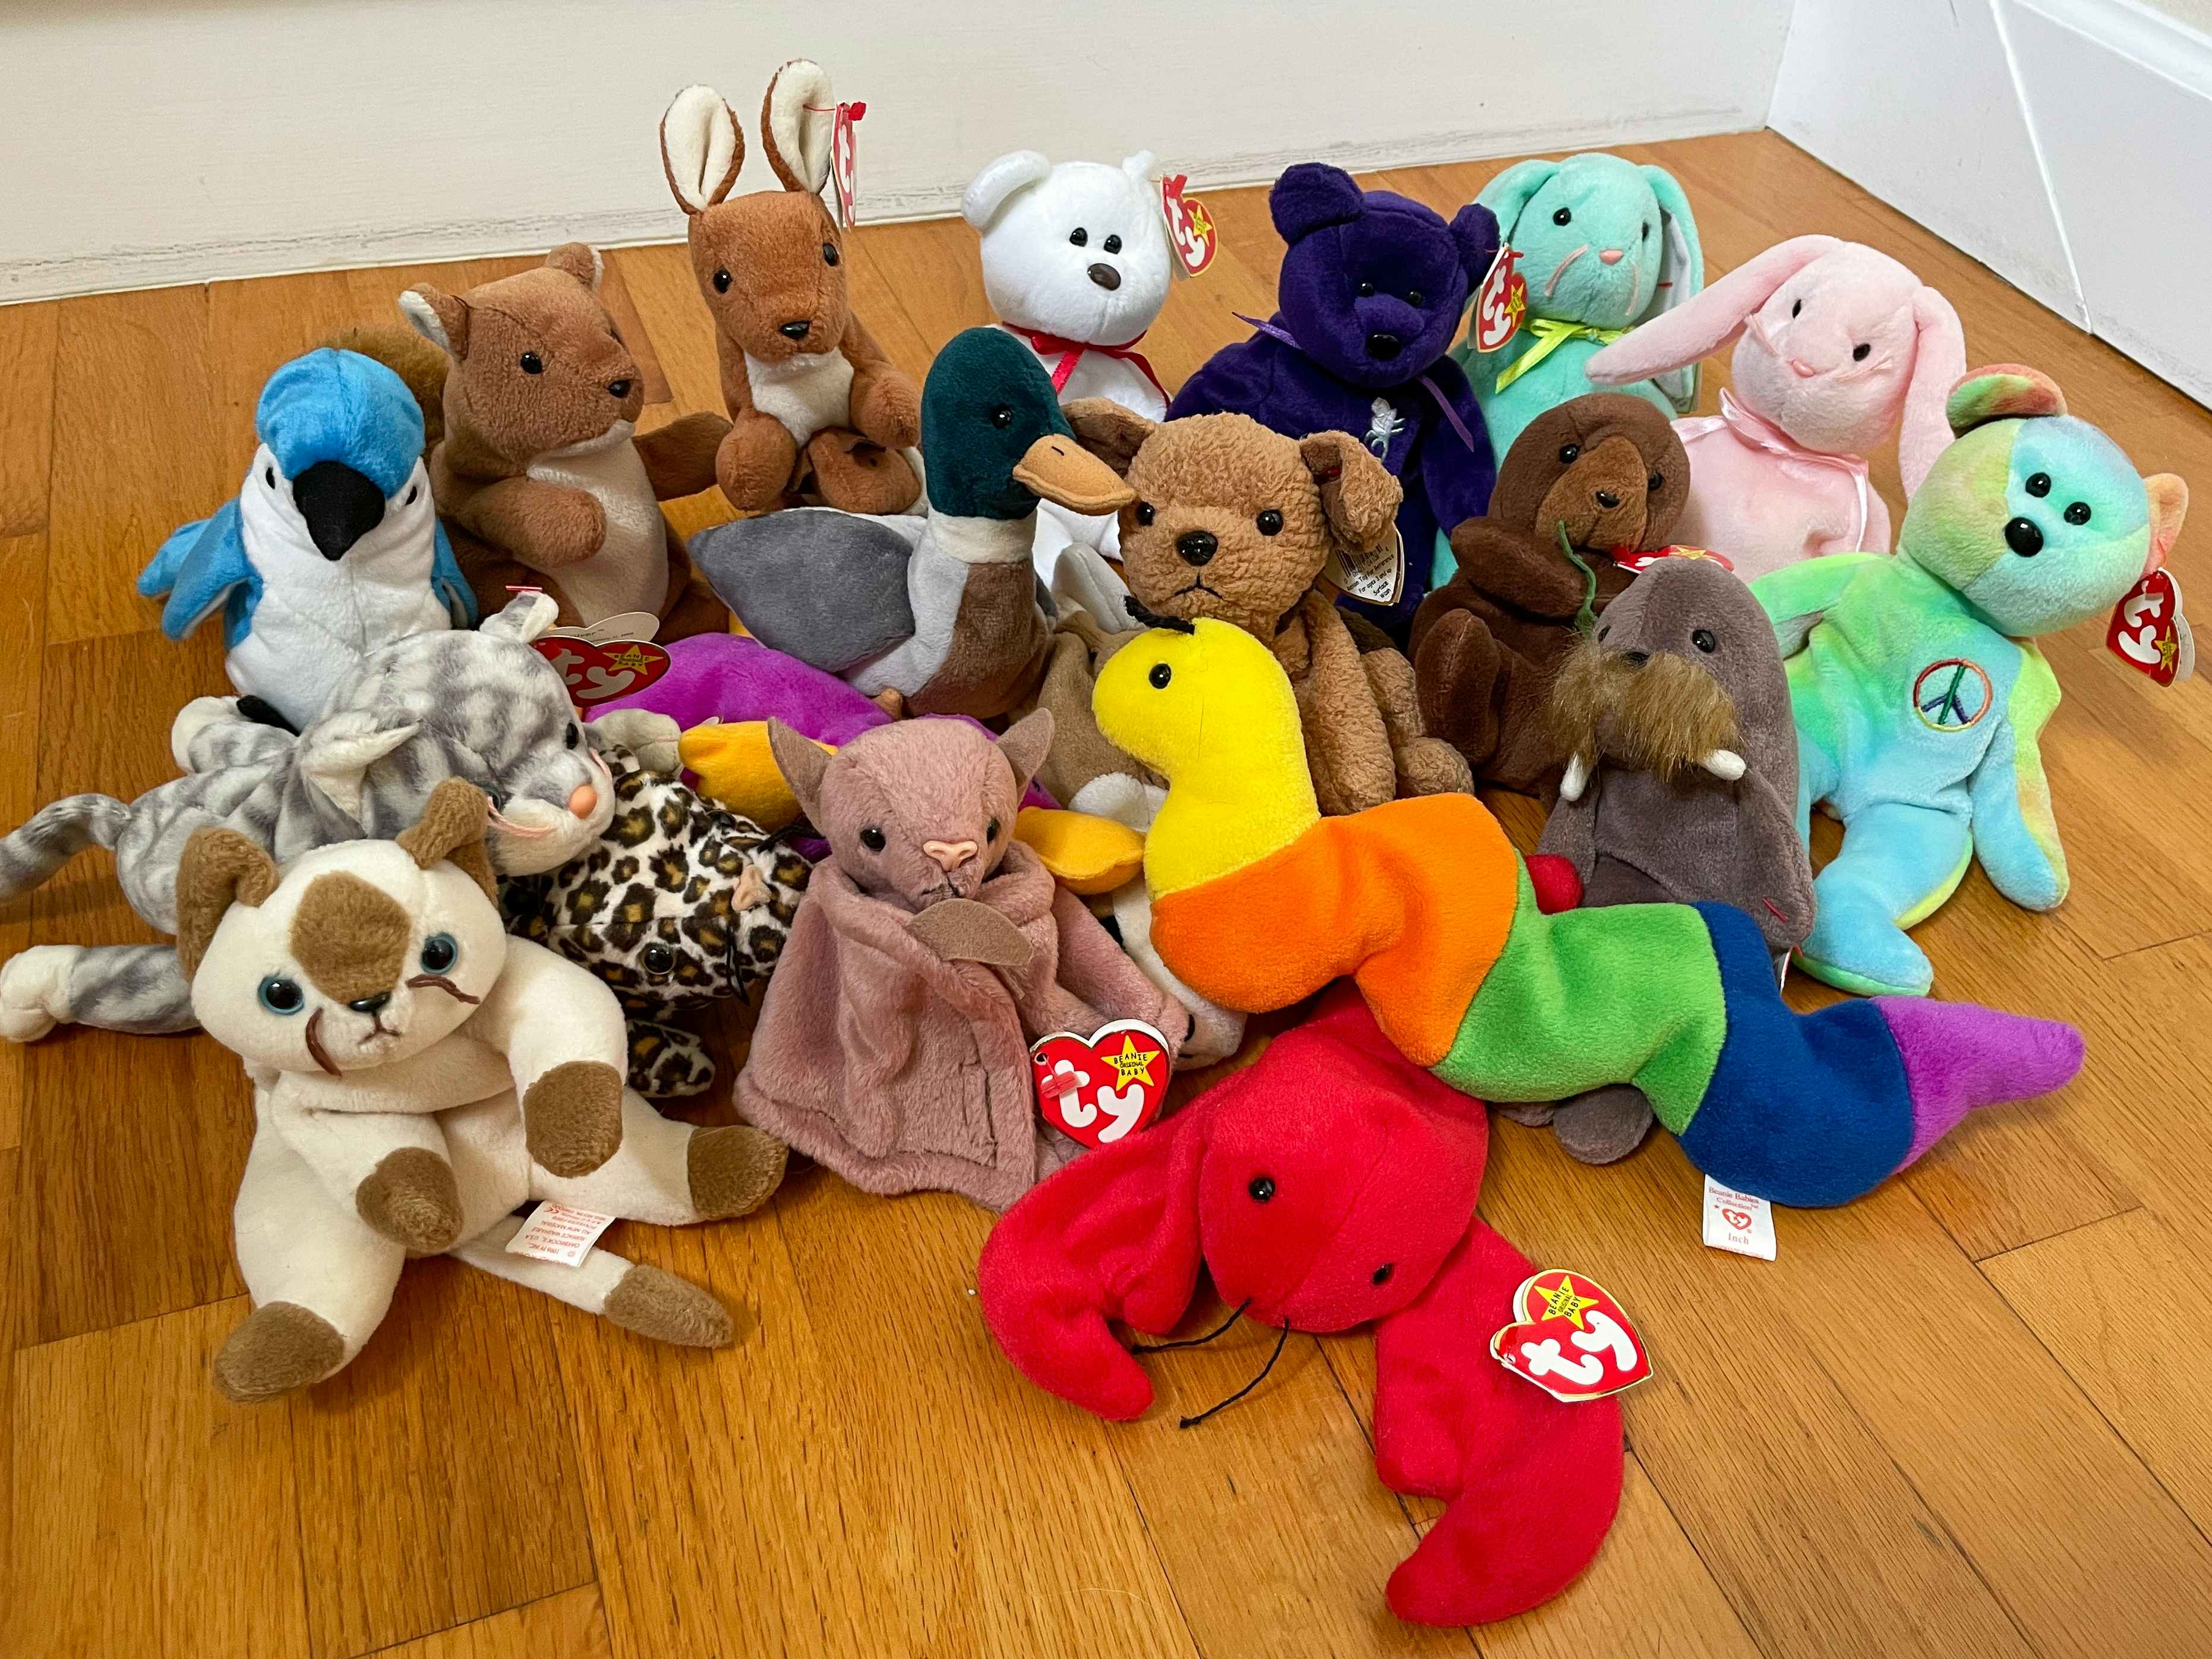 A large pile of beanie babies sitting together on the floor.